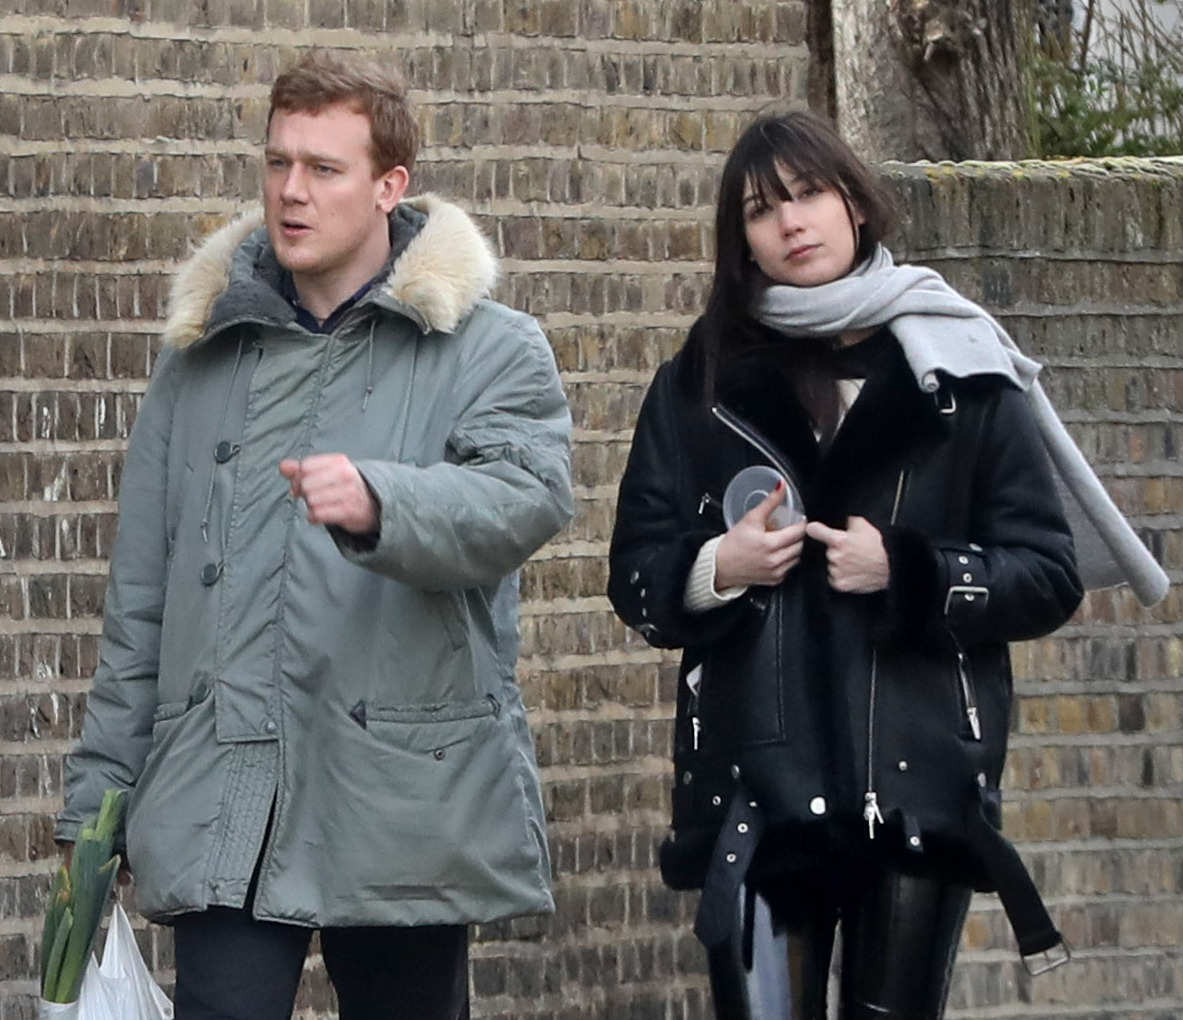 Daisy Lowe out in North London